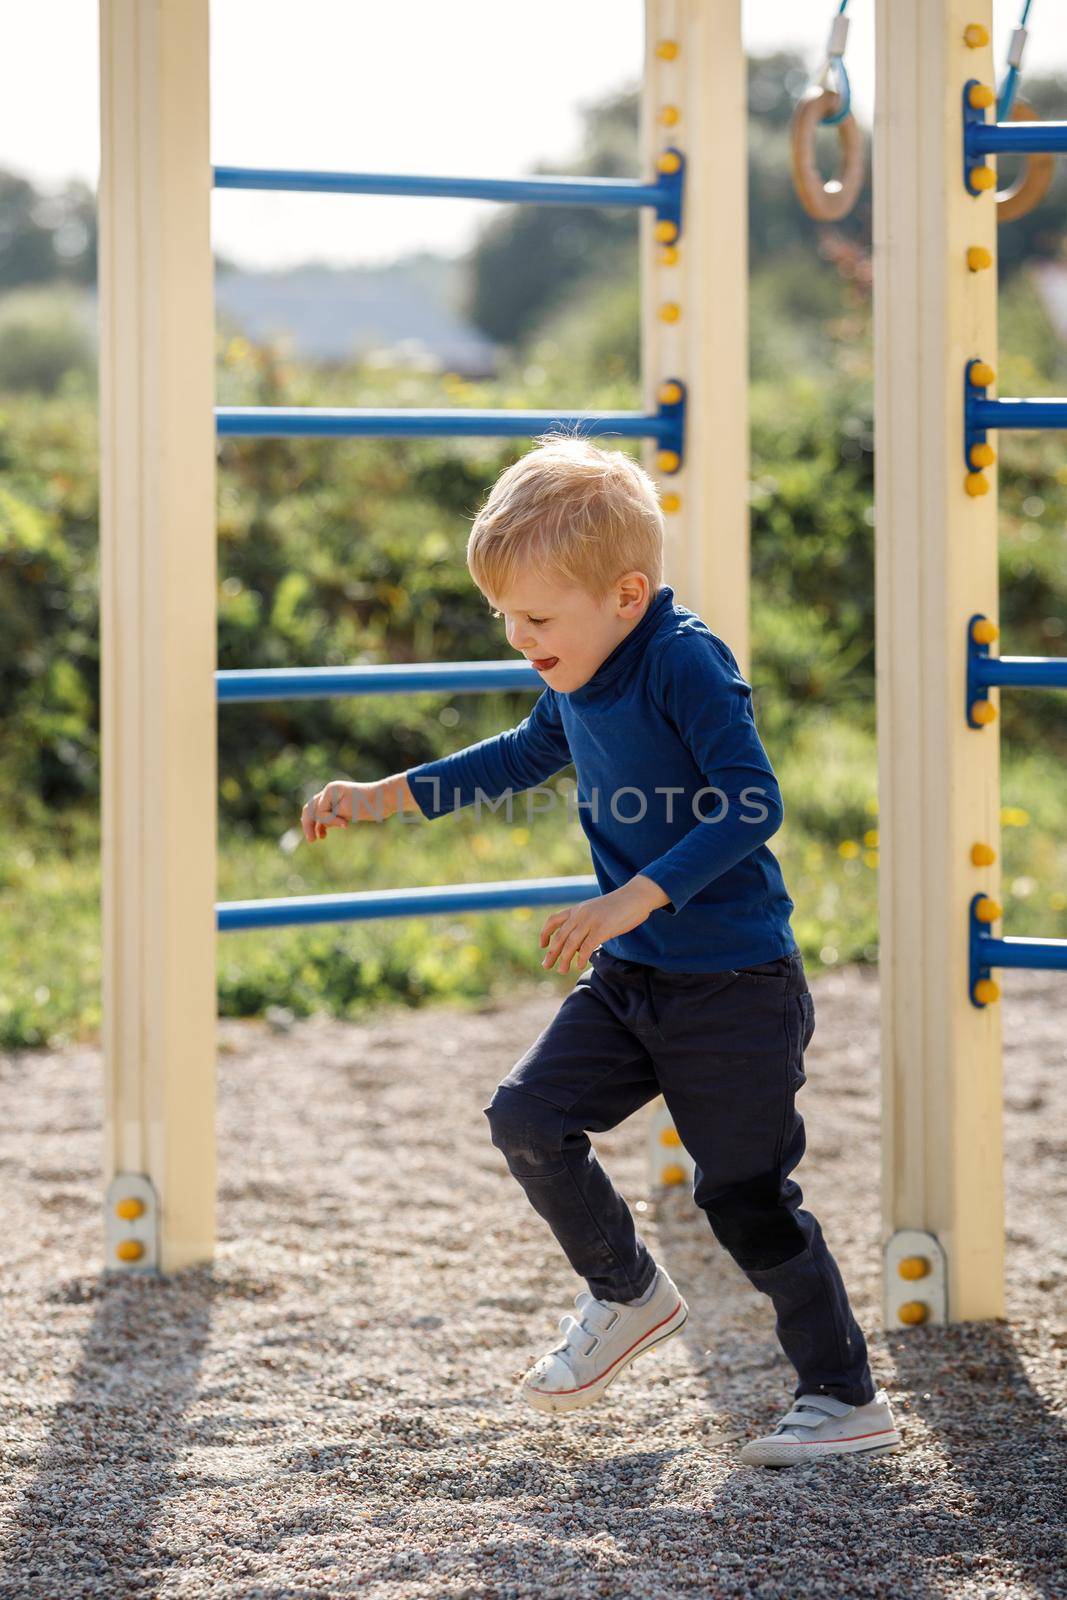 The little boy starts run forward outside on a playground on a summer day. The concept of child sport and active in fresh air by Lincikas